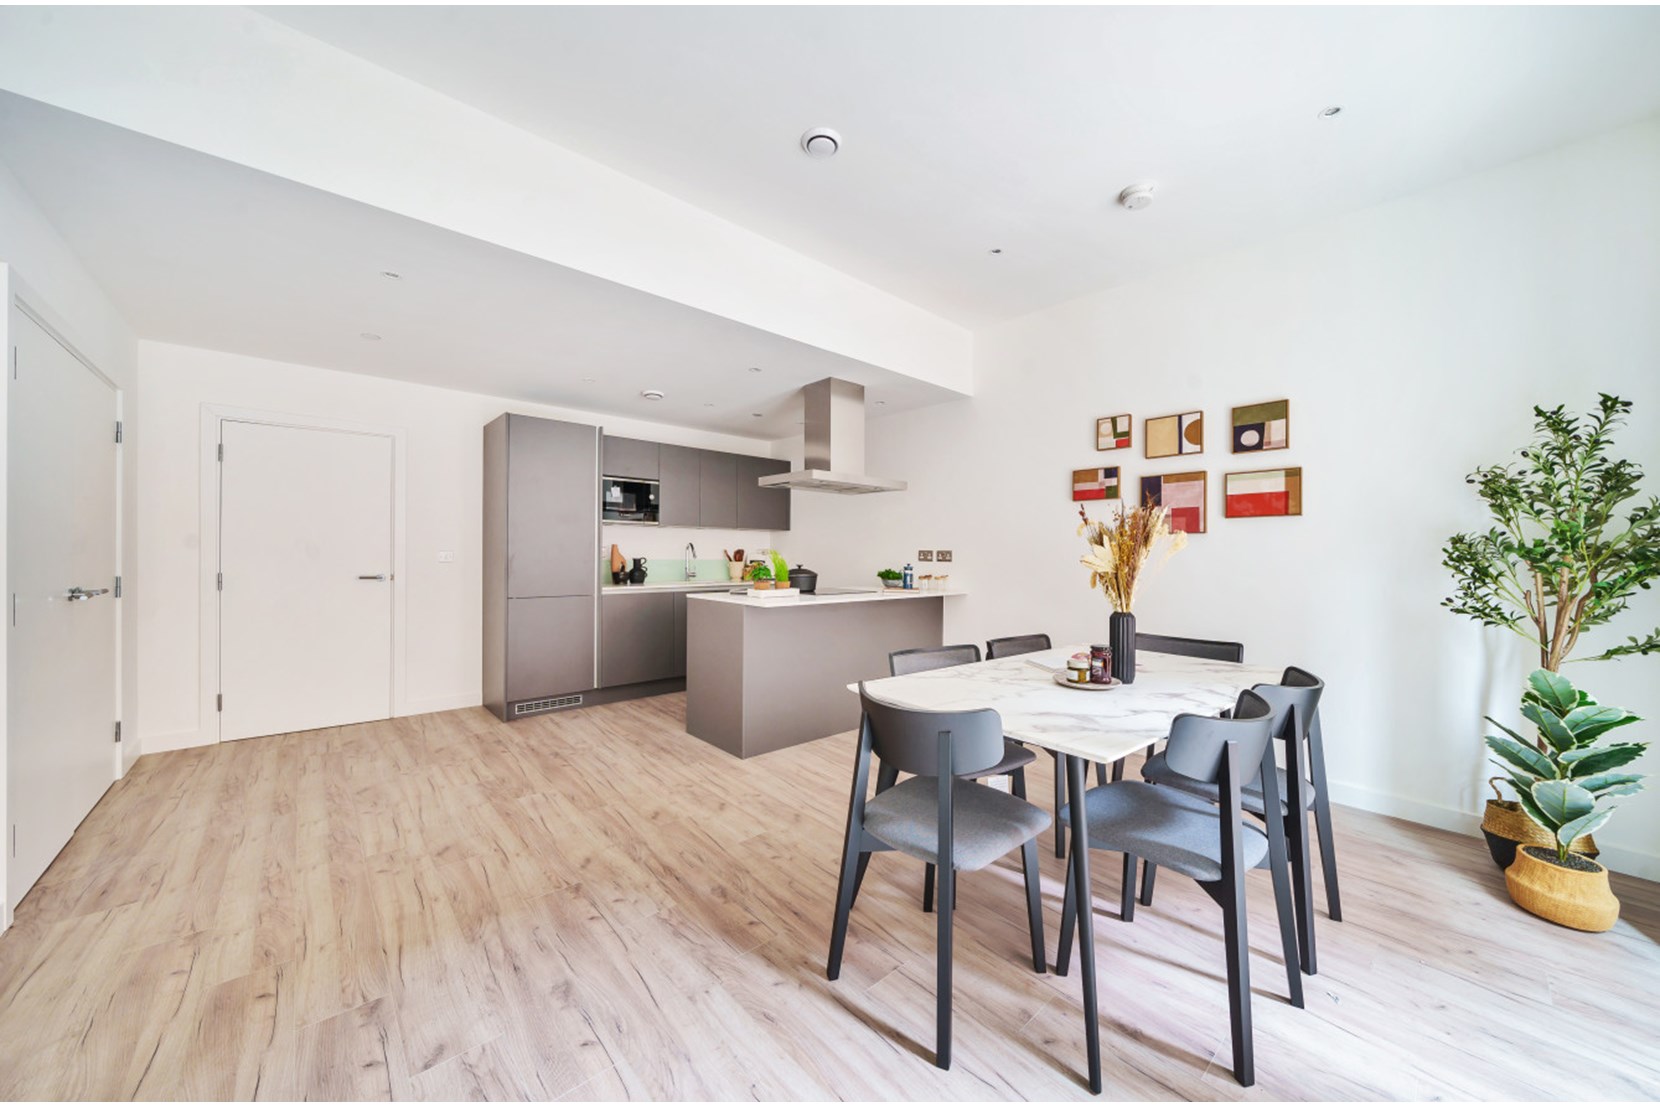 Apartments to Rent by Simple Life London in Anchor's Point, Royal Albert Dock, Newham, E16, kitchen dining area